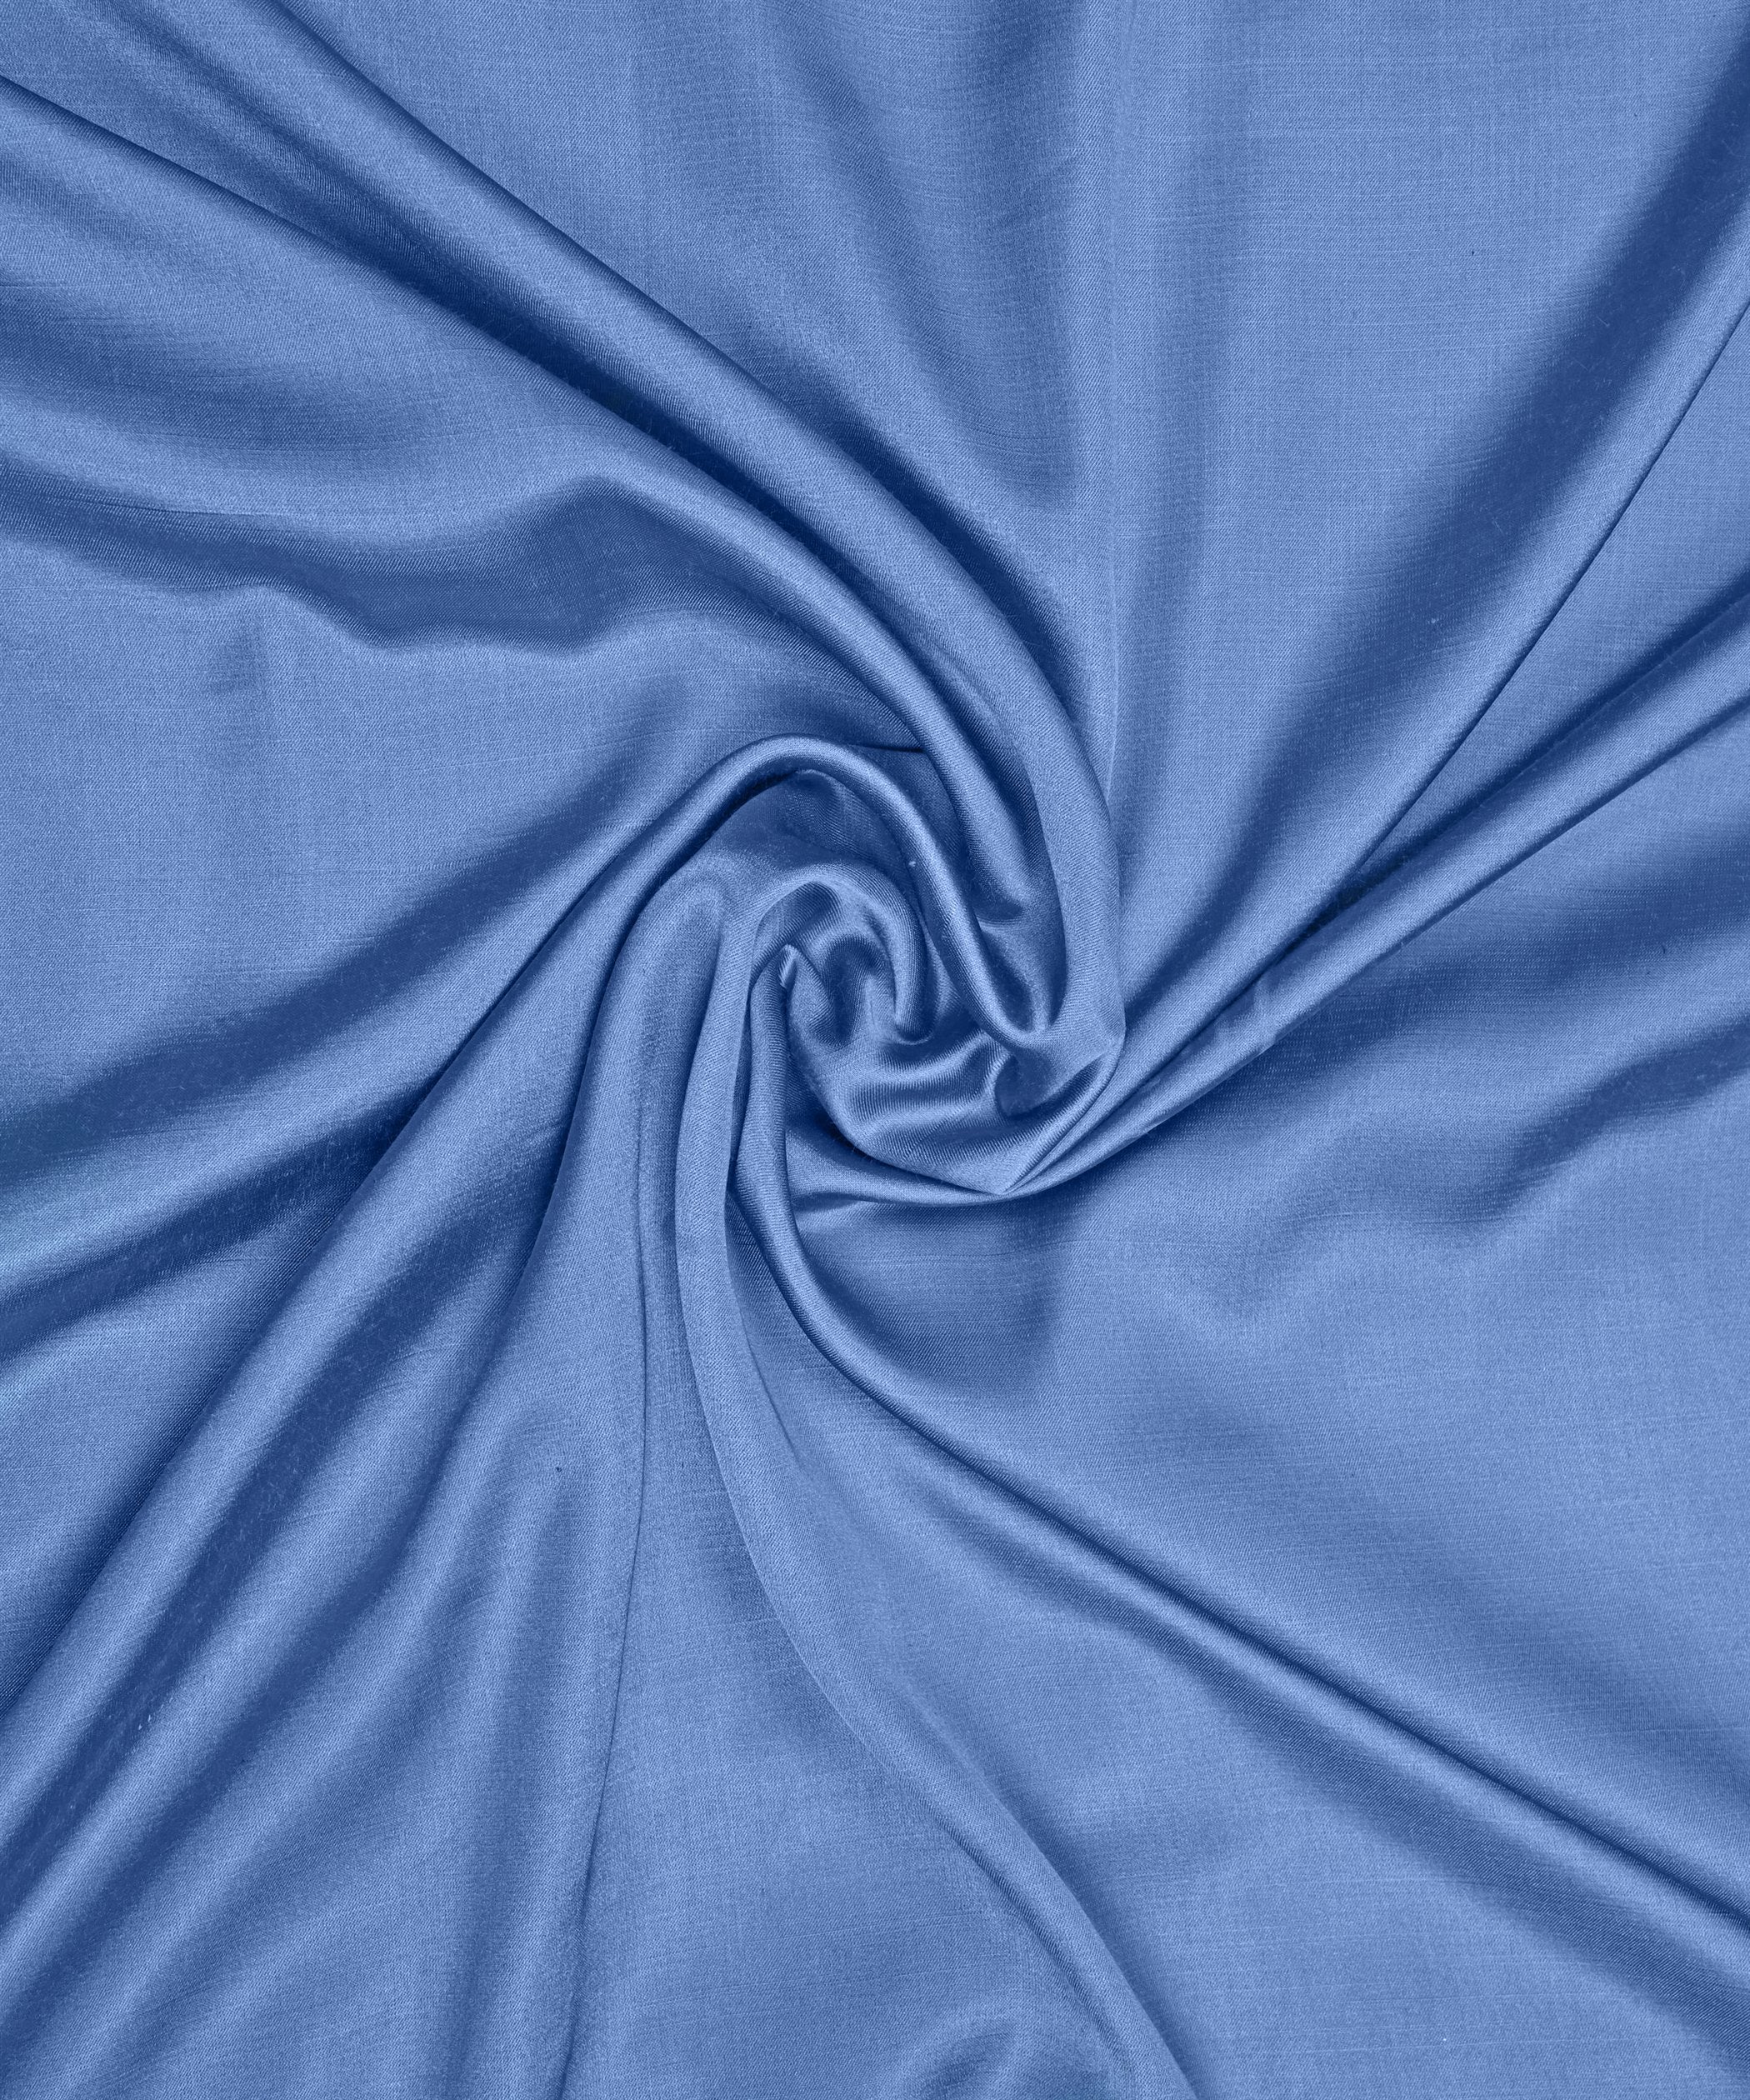 Buy Glossy Blue Plain Modal Satin Fabric Online At Wholesale Prices – Fabric  Depot